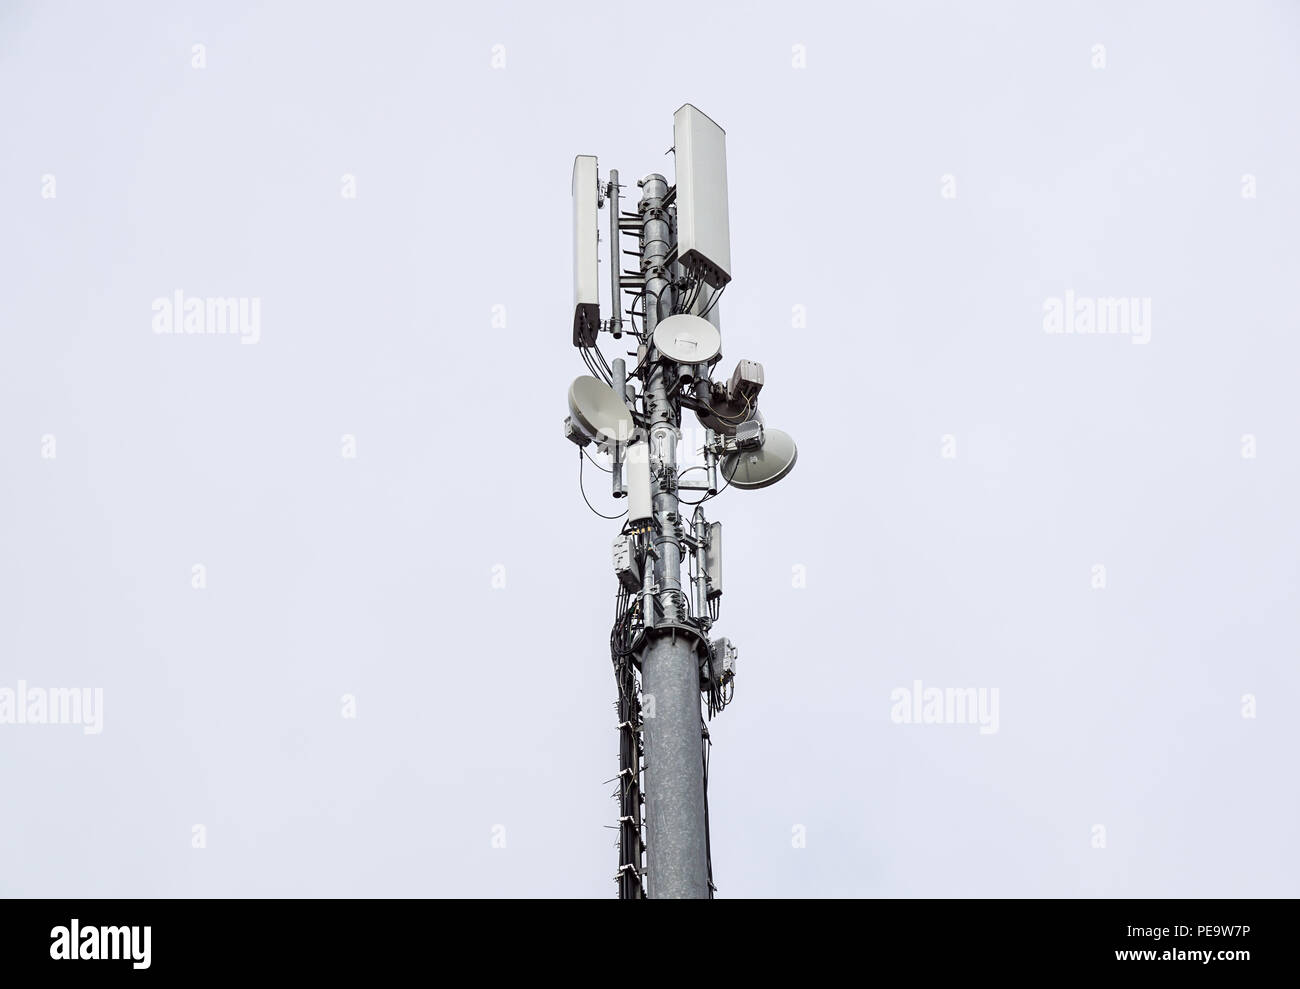 Technology on the top of the telecommunication GSM. Masts for mobile phone signal. Tower with antennas of cellular communication . Stock Photo